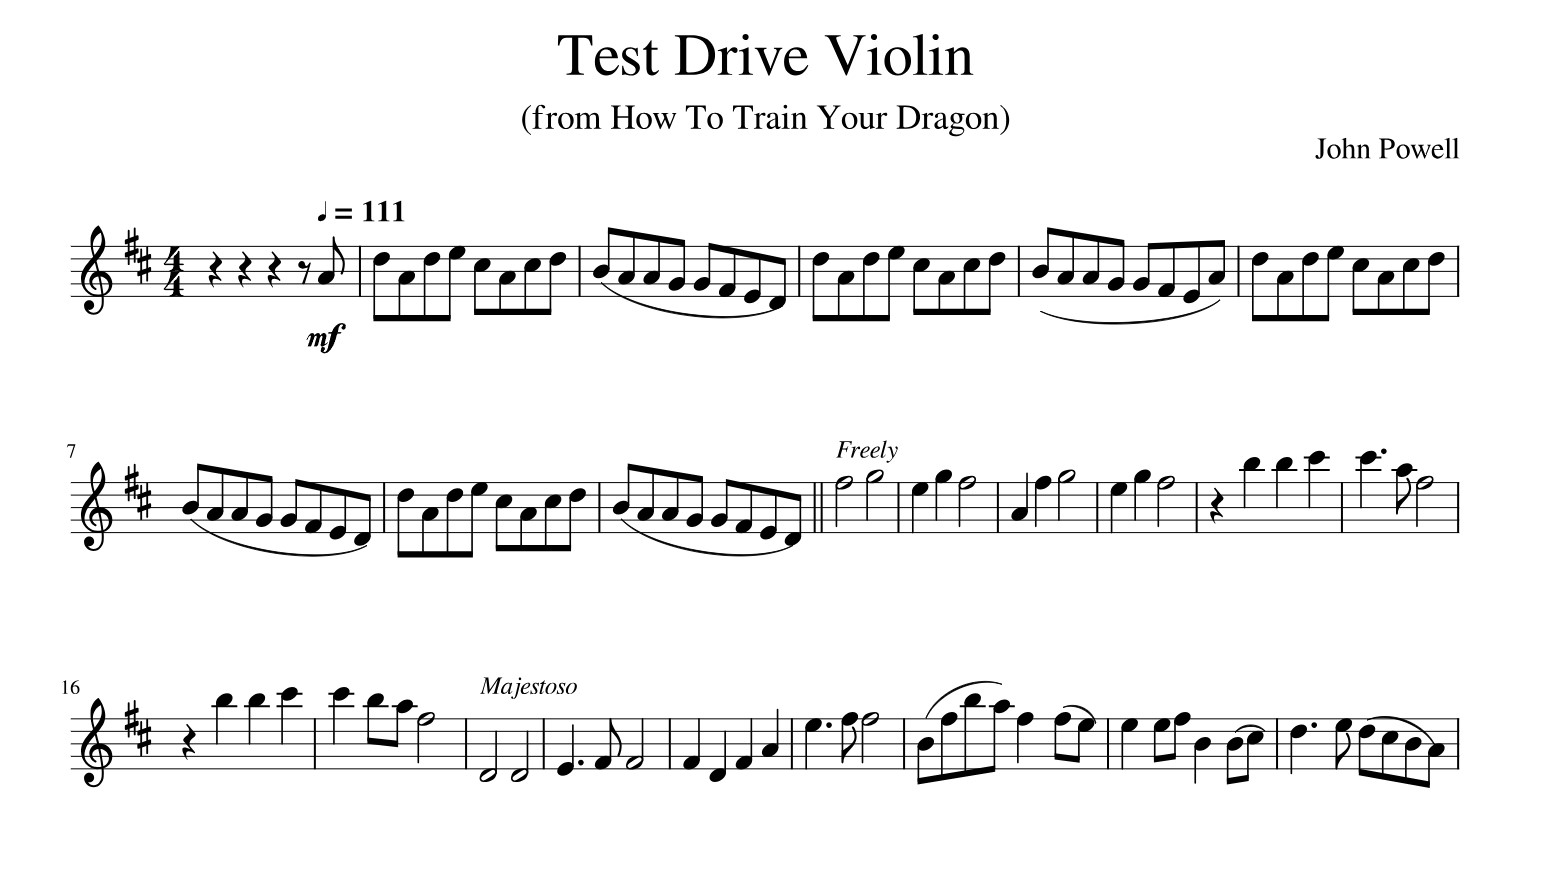 How To Train Your Dragon Test Drive Violin Sheet Music